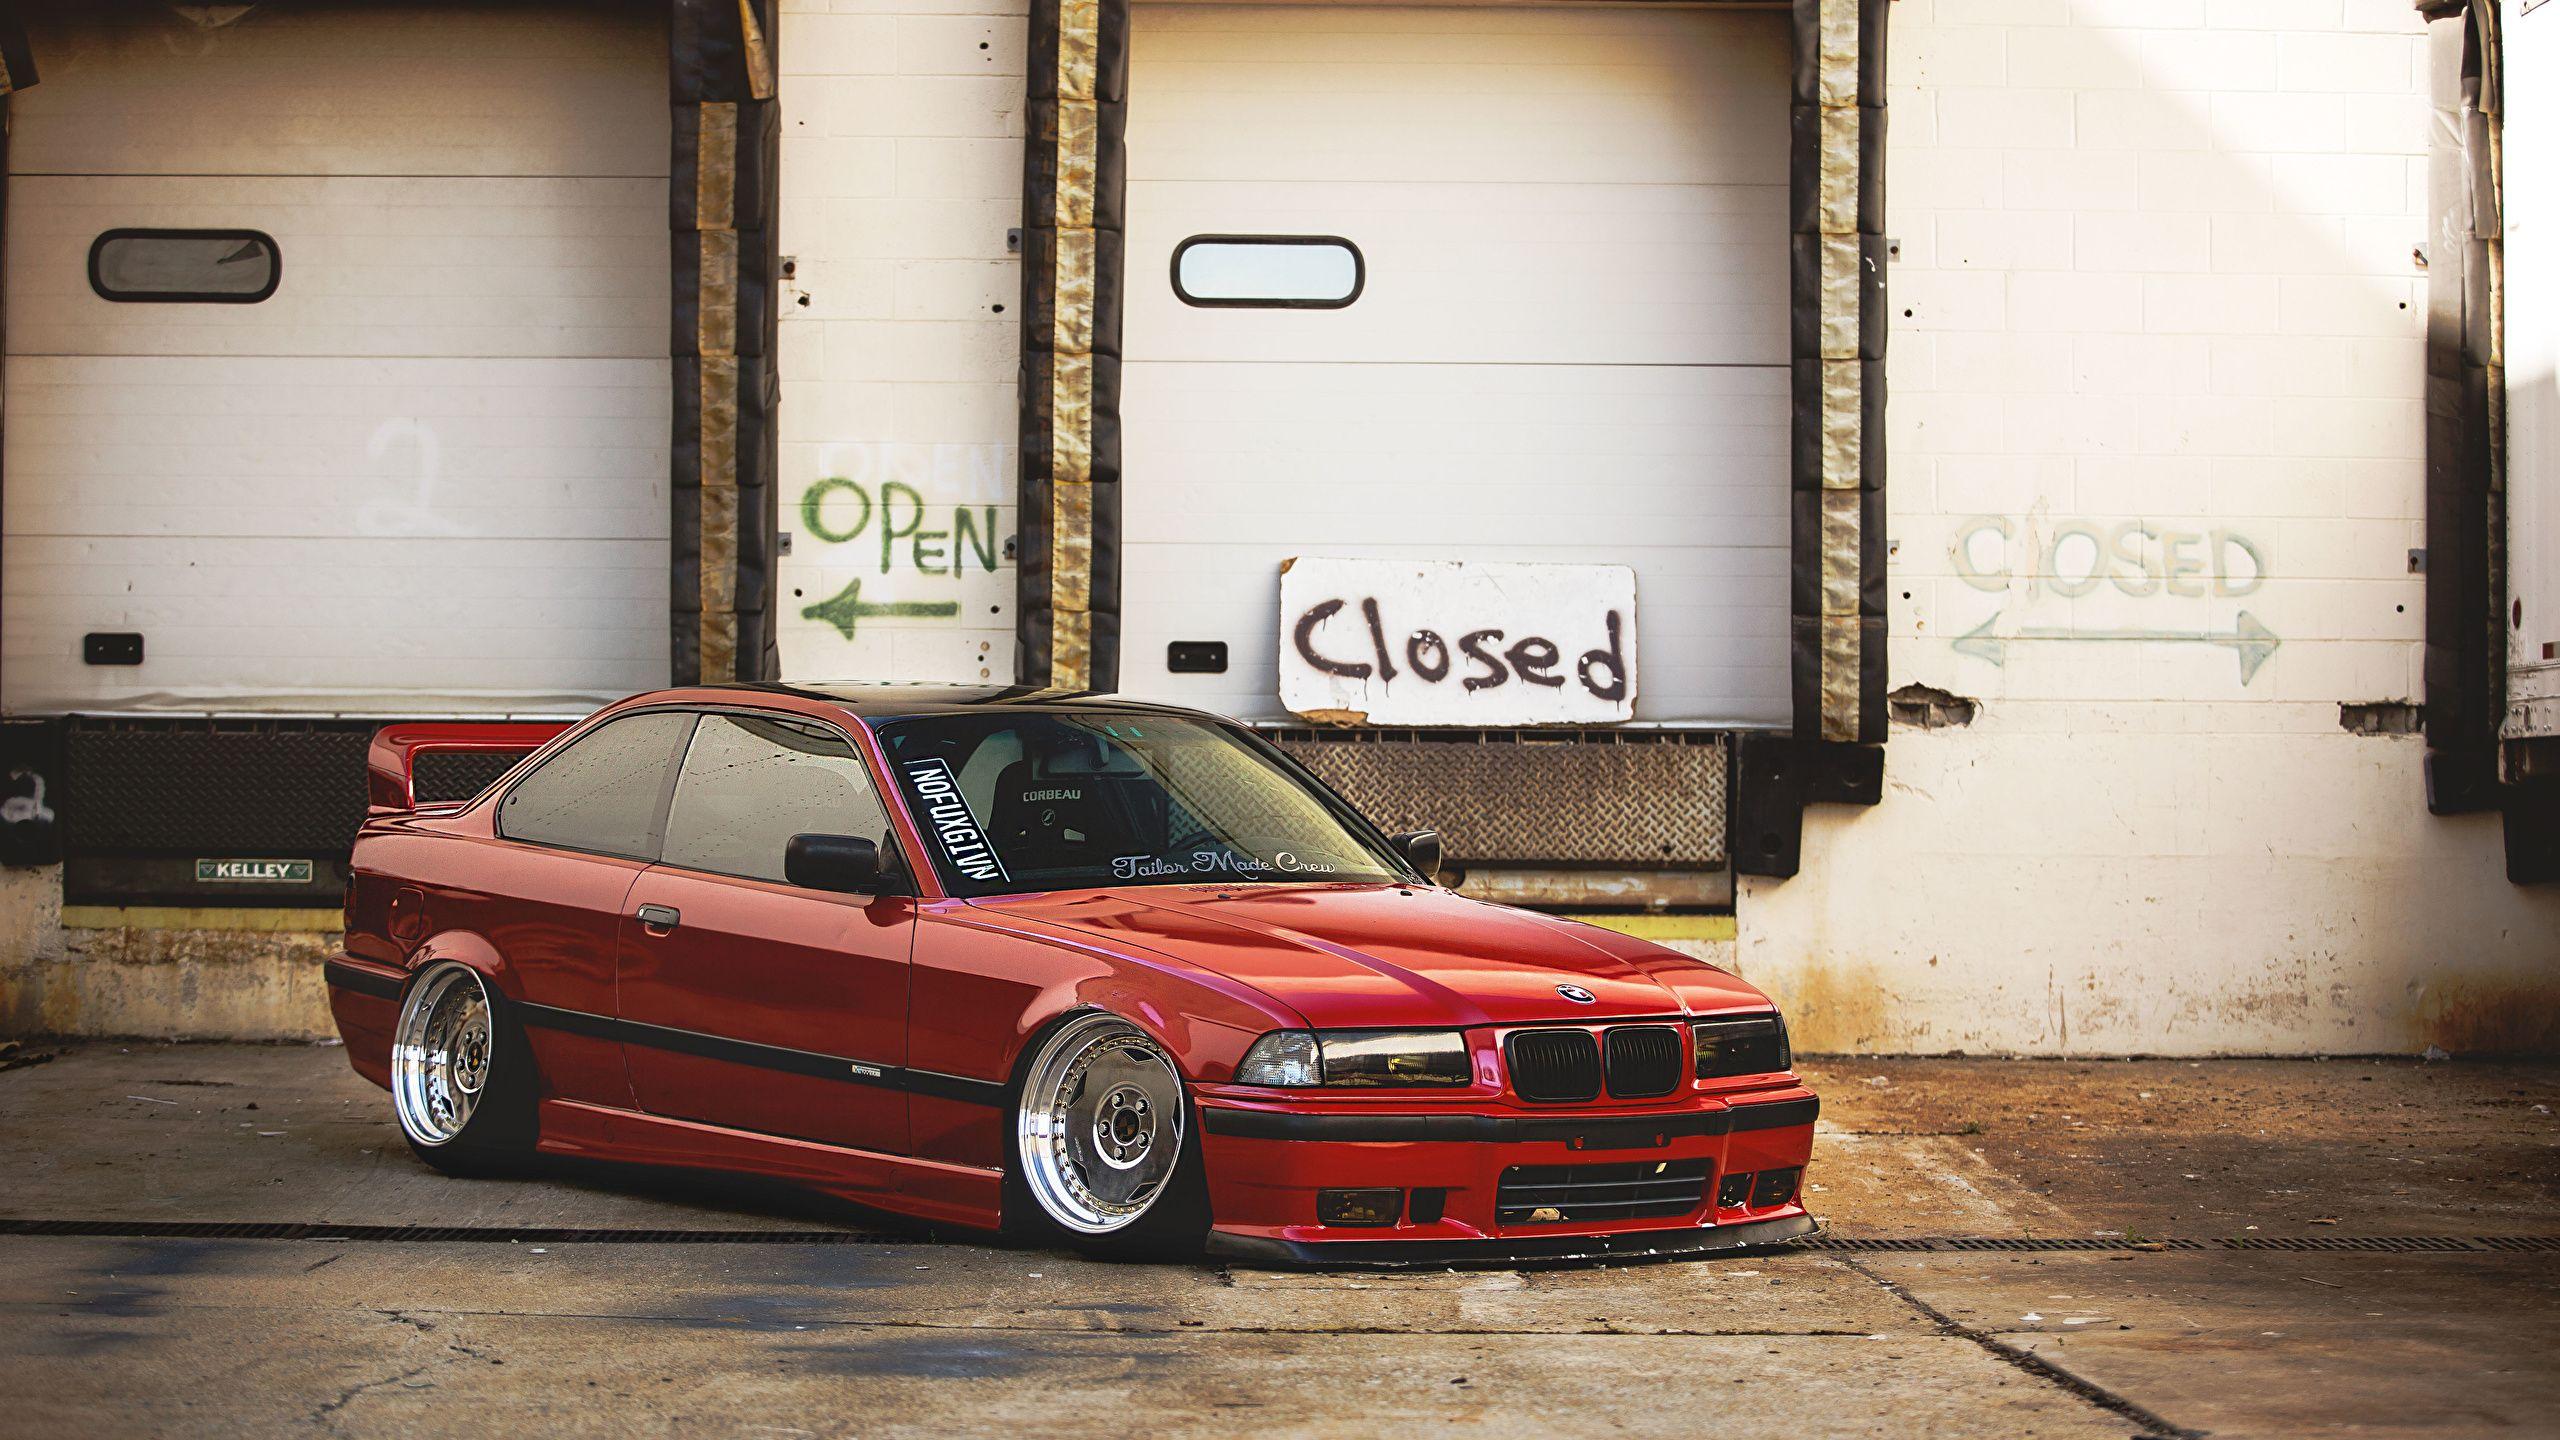 BMW BMW E36 Car Red Msport HD Wallpapers  Desktop and Mobile Images   Photos